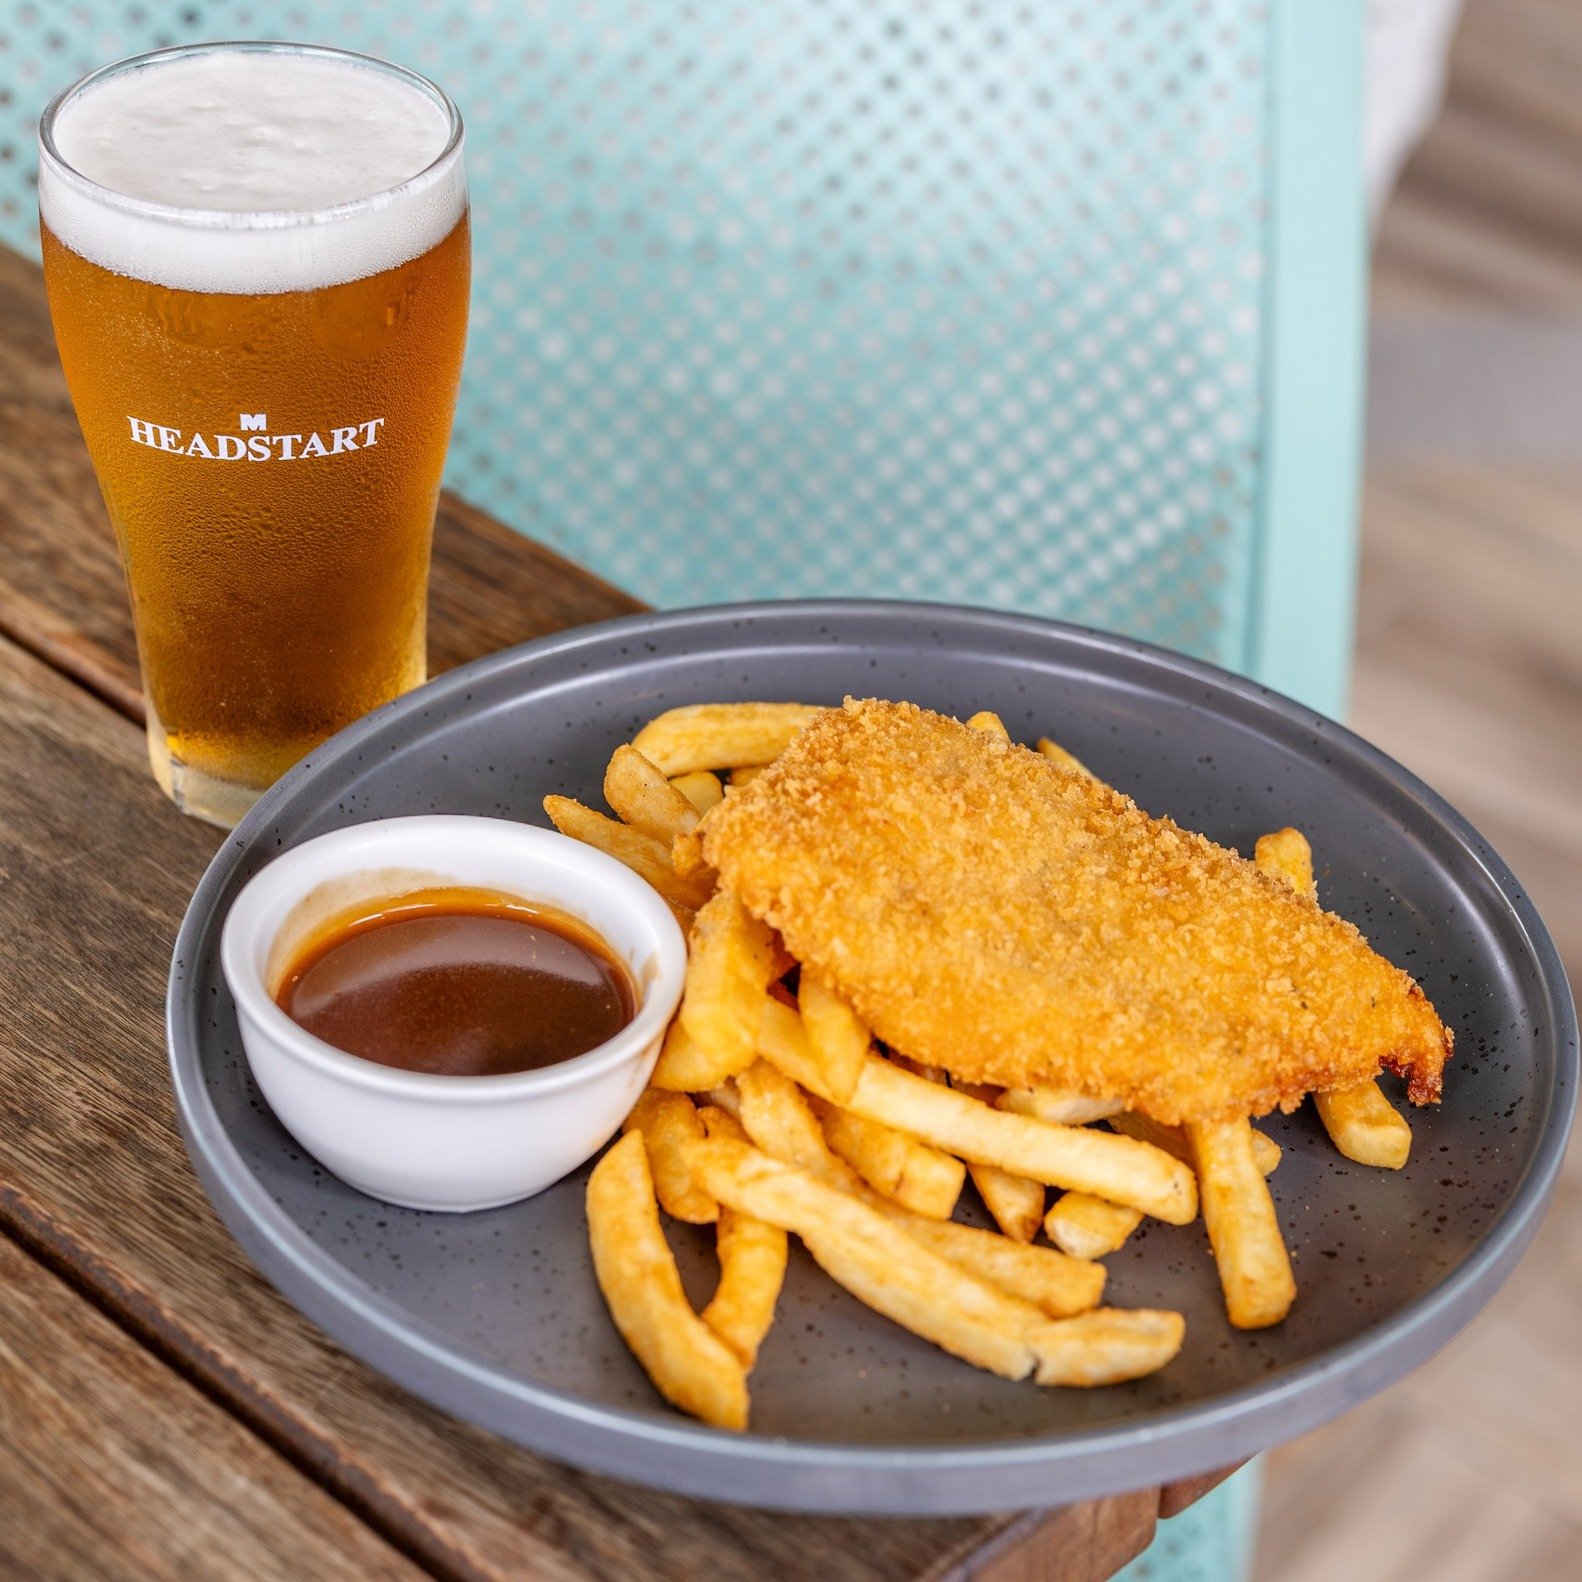 Tradies! Treat yourself to our $20 Friday Bundle! 🤩

Indulge in a hearty 250g chicken schnitzel paired with beer battered chips, gravy, and a refreshing pot of Great Northern for only $20.

Available every Friday between 11:30am-8:30pm.

Book your t